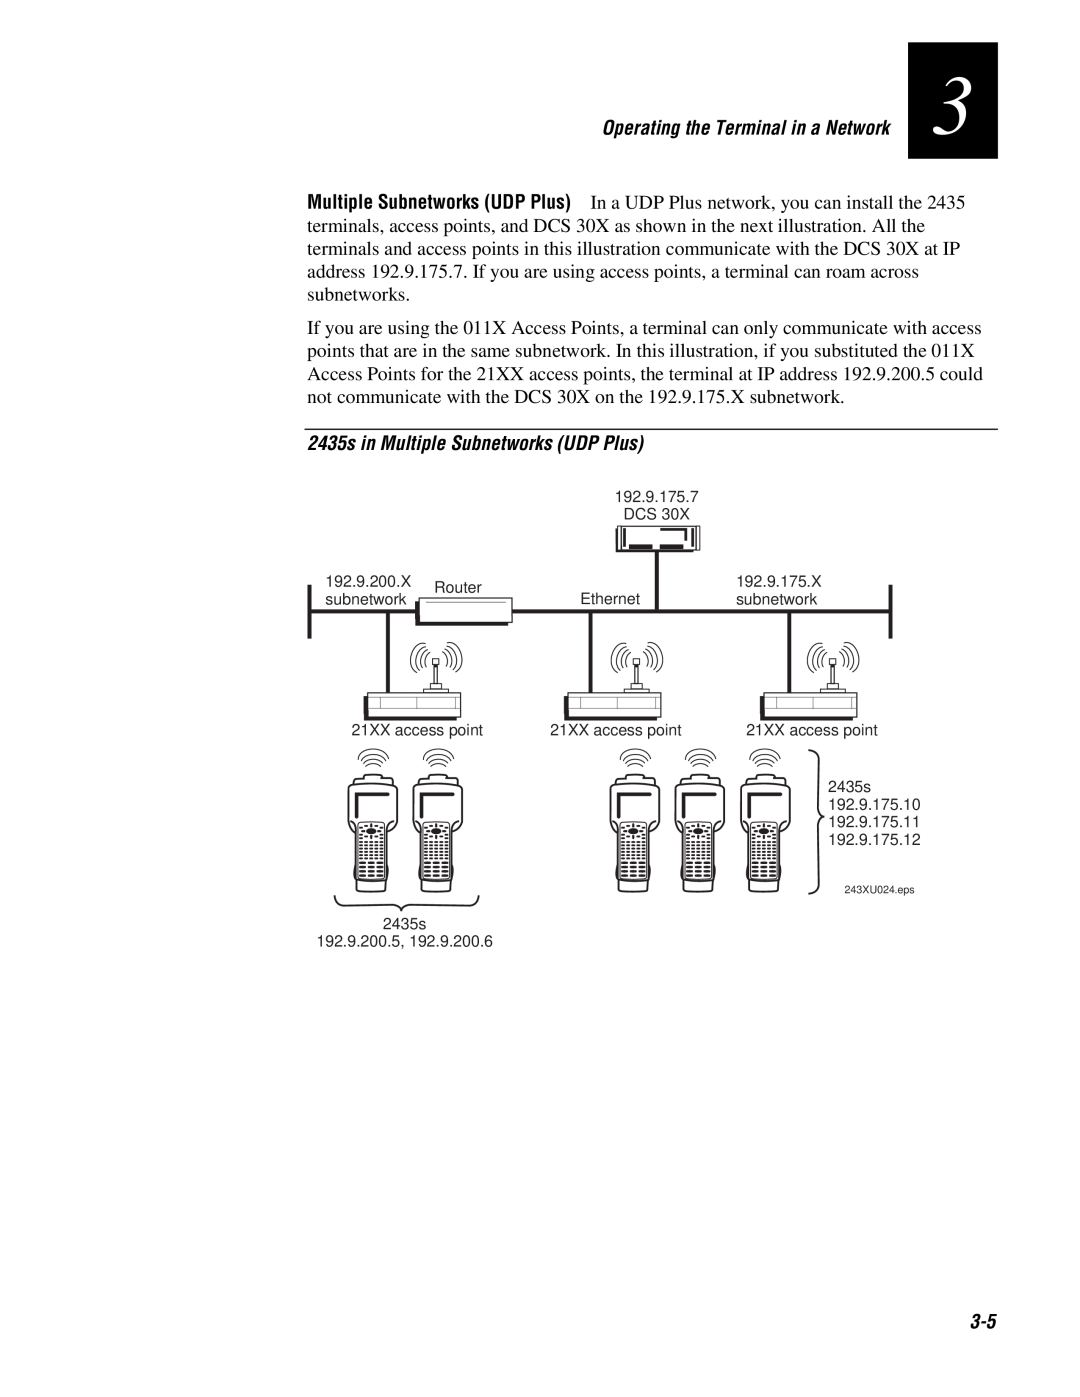 IBM 243X user manual 2435s in Multiple Subnetworks UDP Plus, 21XX access point 